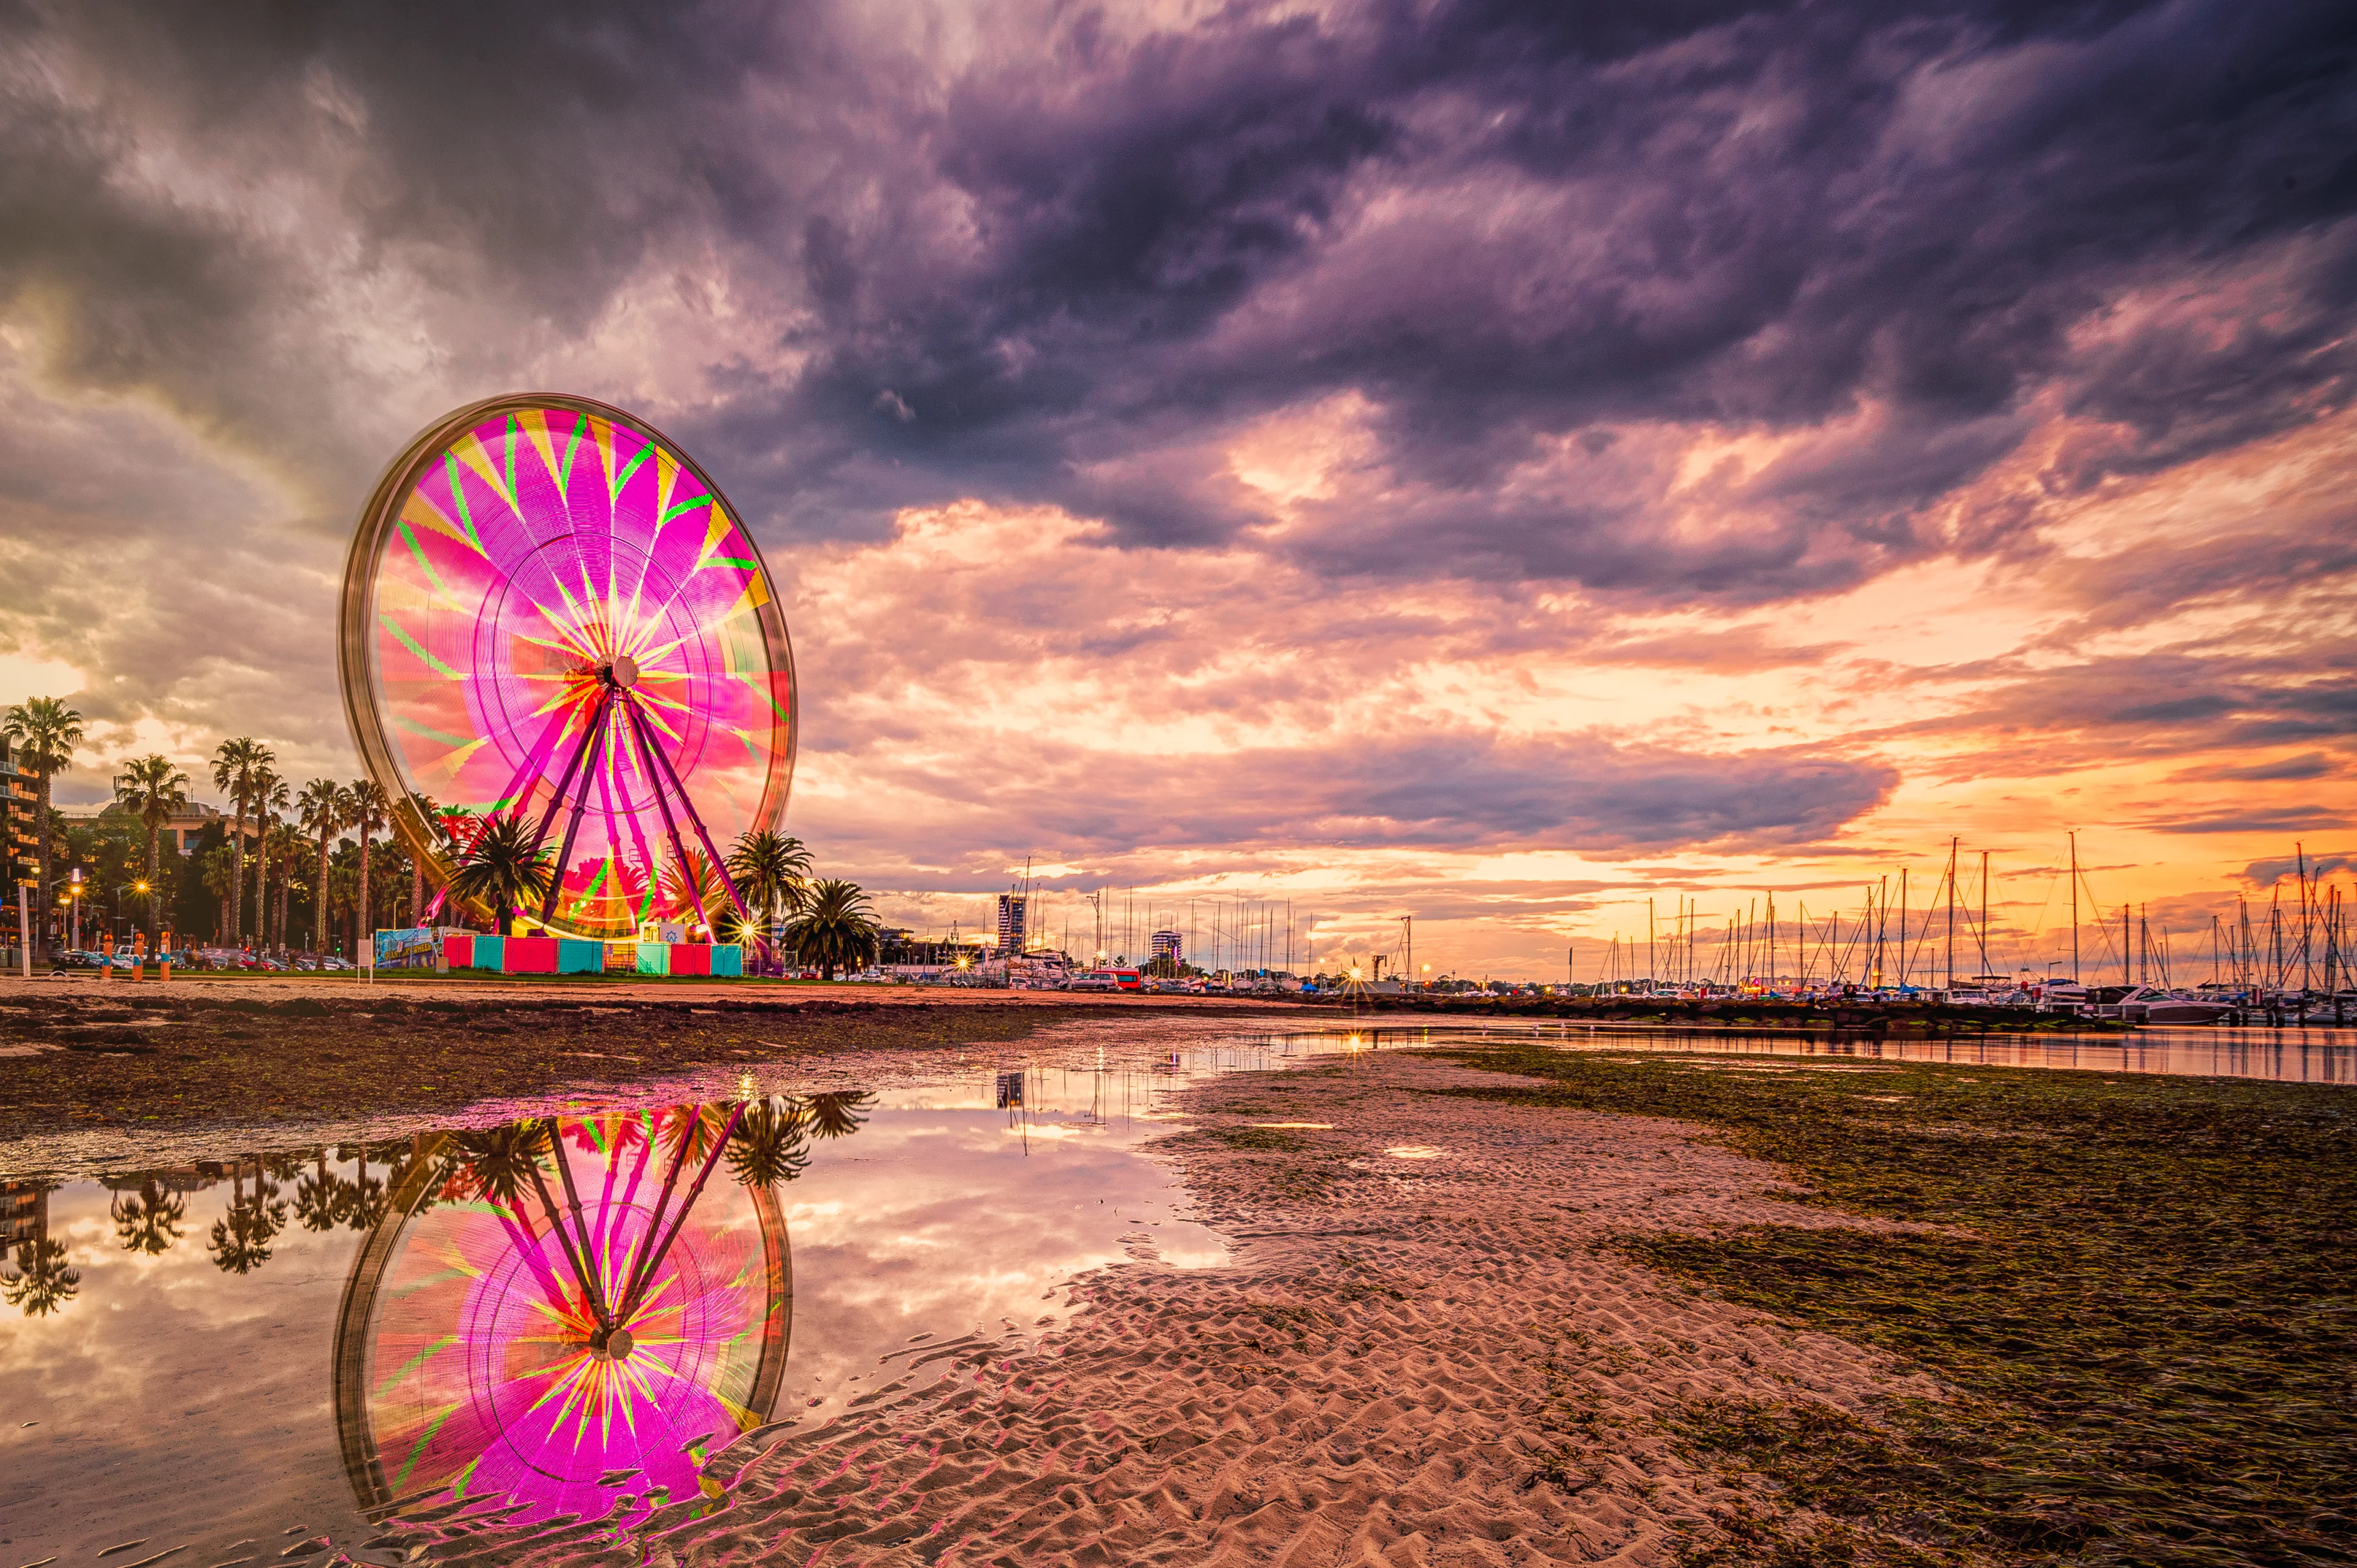 The ferris wheel lit up in bright lights. The attraction is known as the Giant Sky Wheel on the Geelong waterfront.